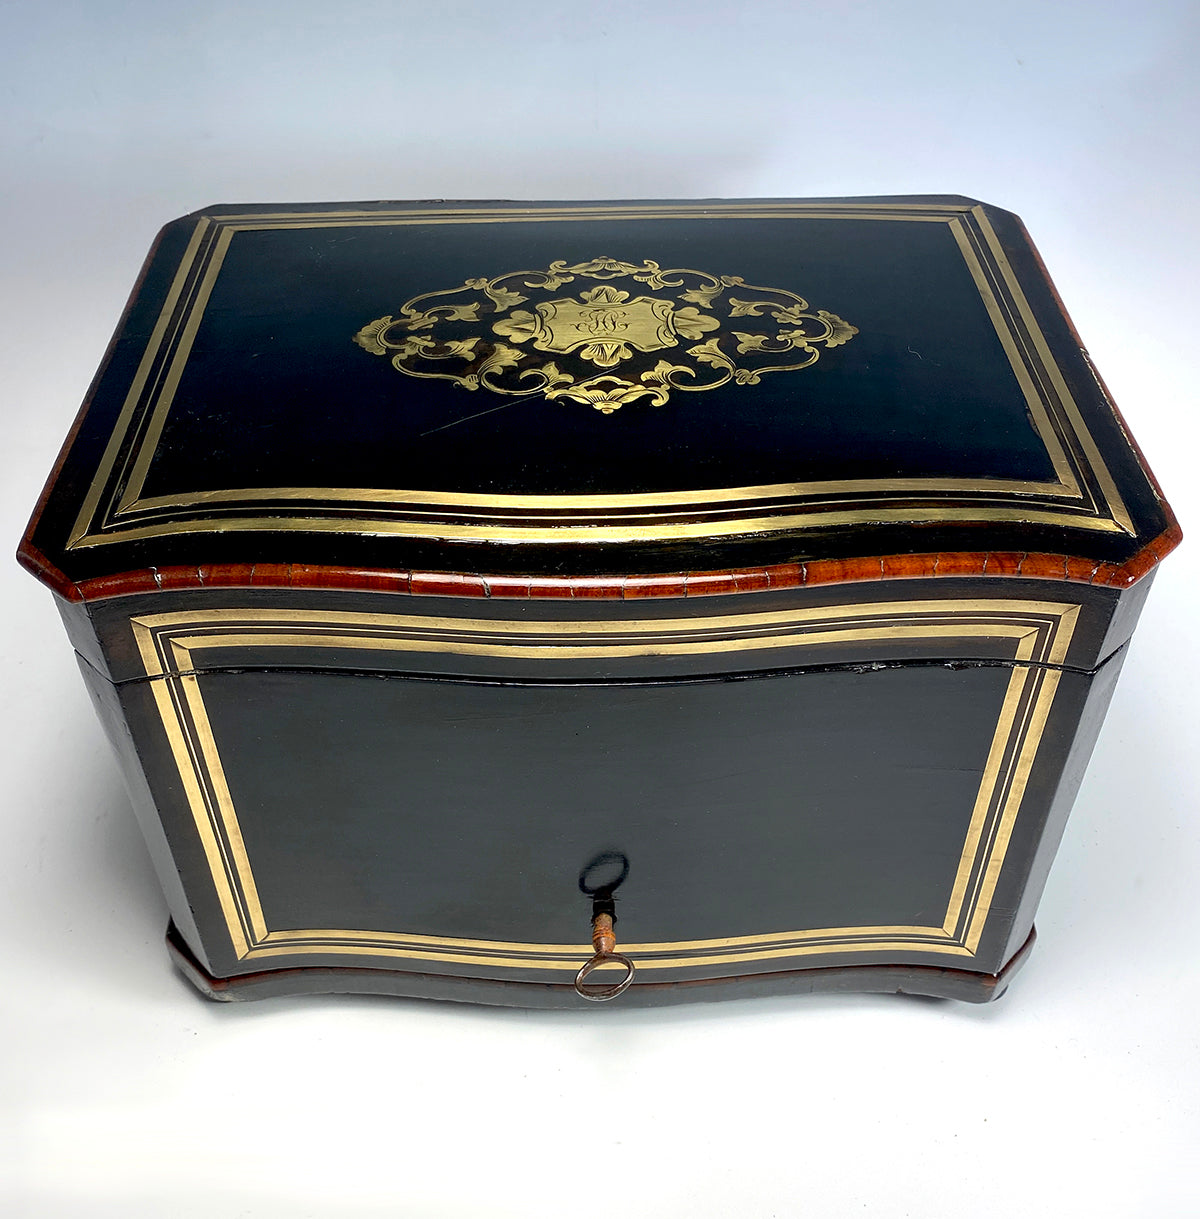 Fine Antique French Boulle 11" Cigar Chest, Cabinet, Box, Napoleon III Cabinetry Maker